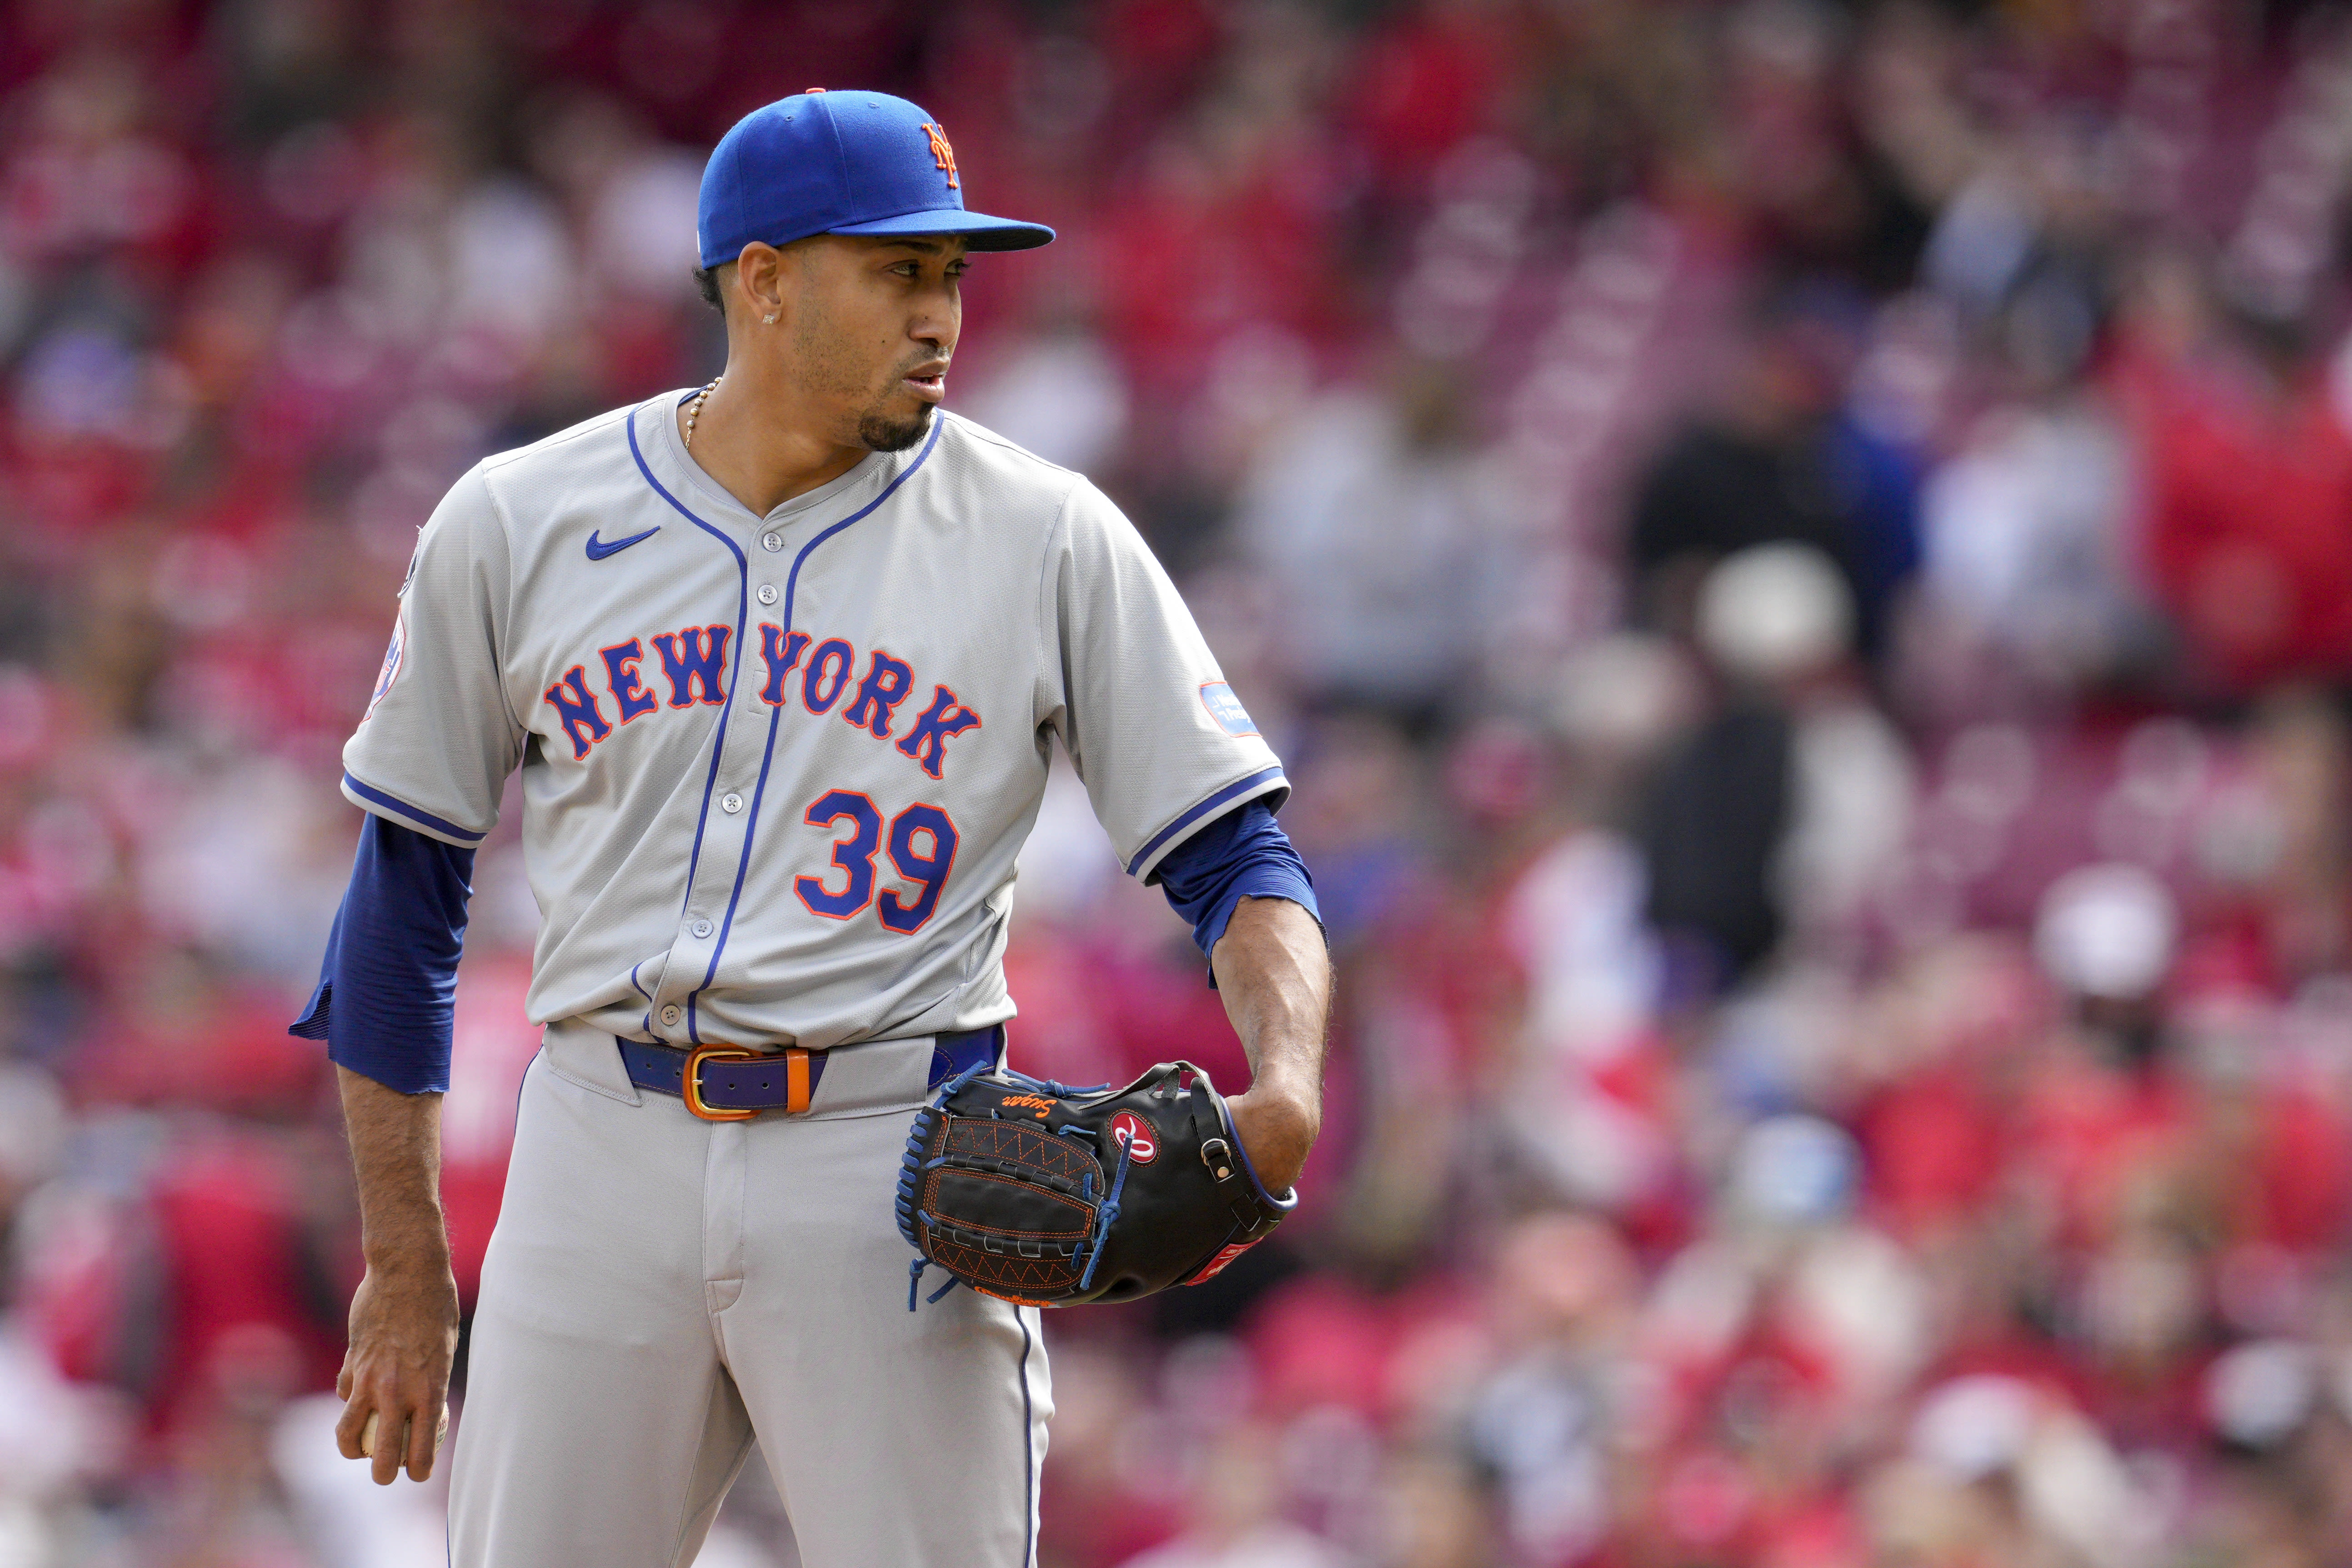 Edwin Diaz's future as Mets closer is 'fluid' amid recent poor outings